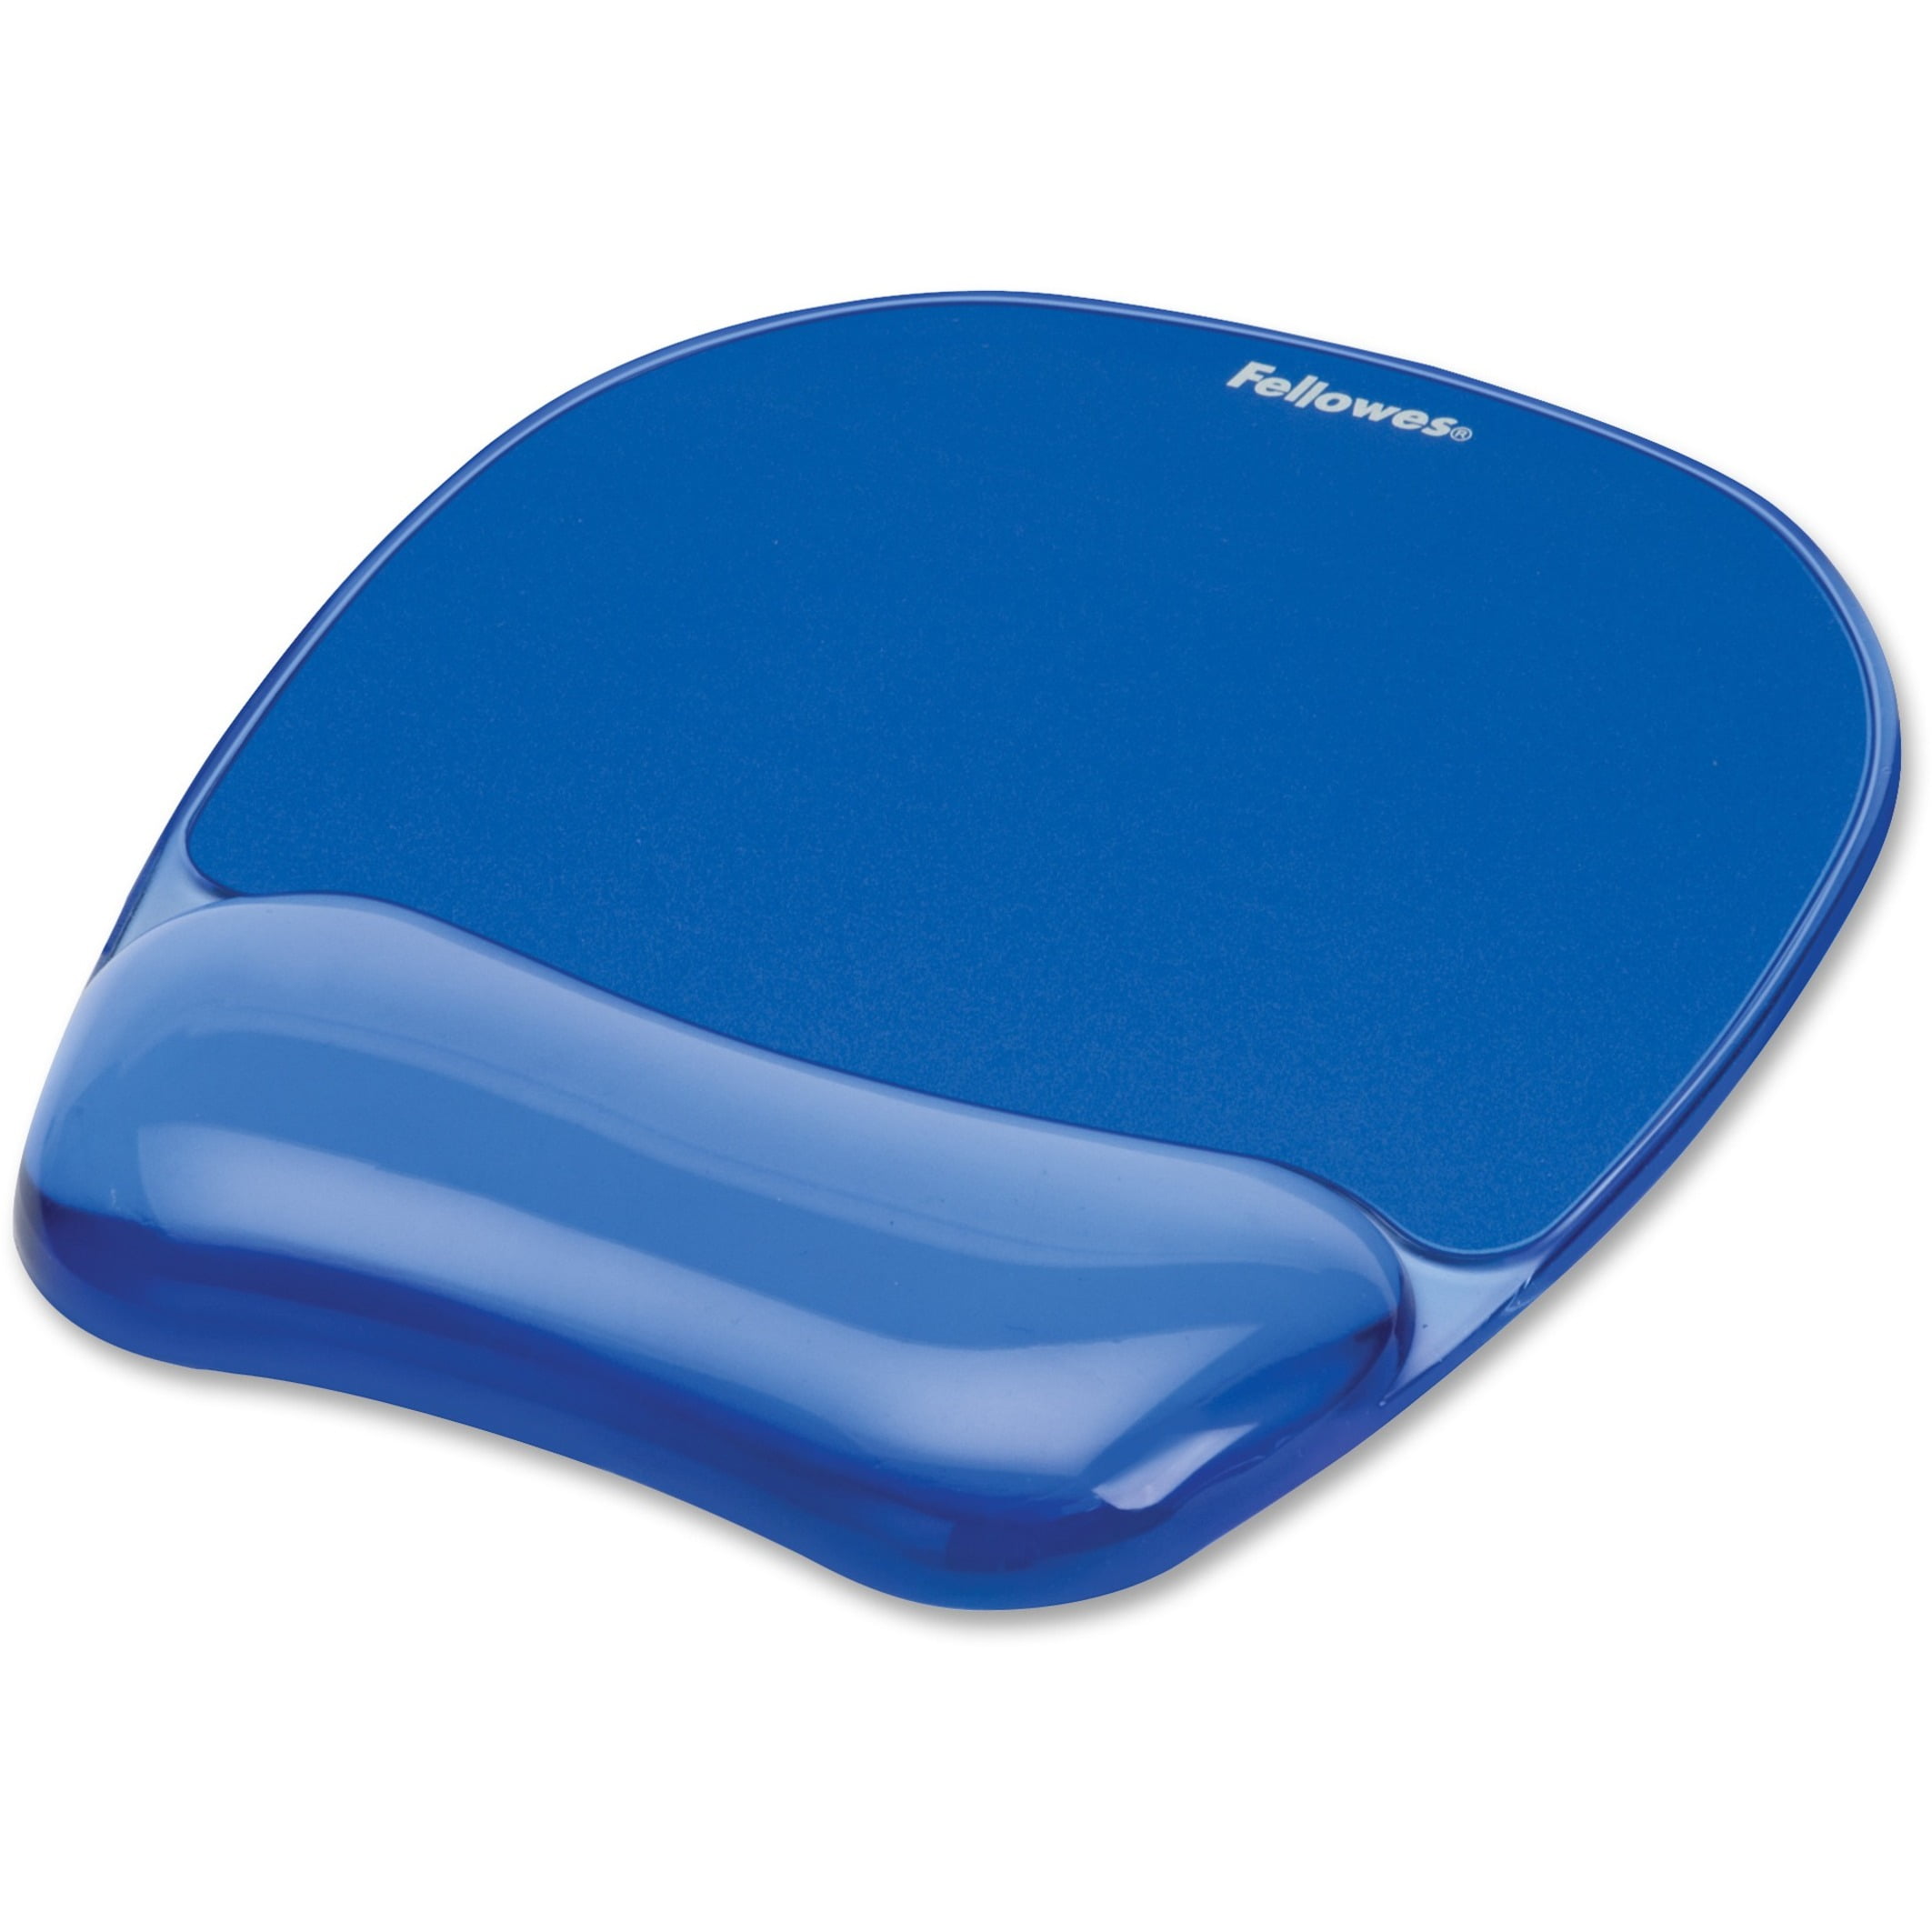 Fellowes 91849 Mircoban Anti-bacteria Laptop Palm Support Wrist Mouse Pad 